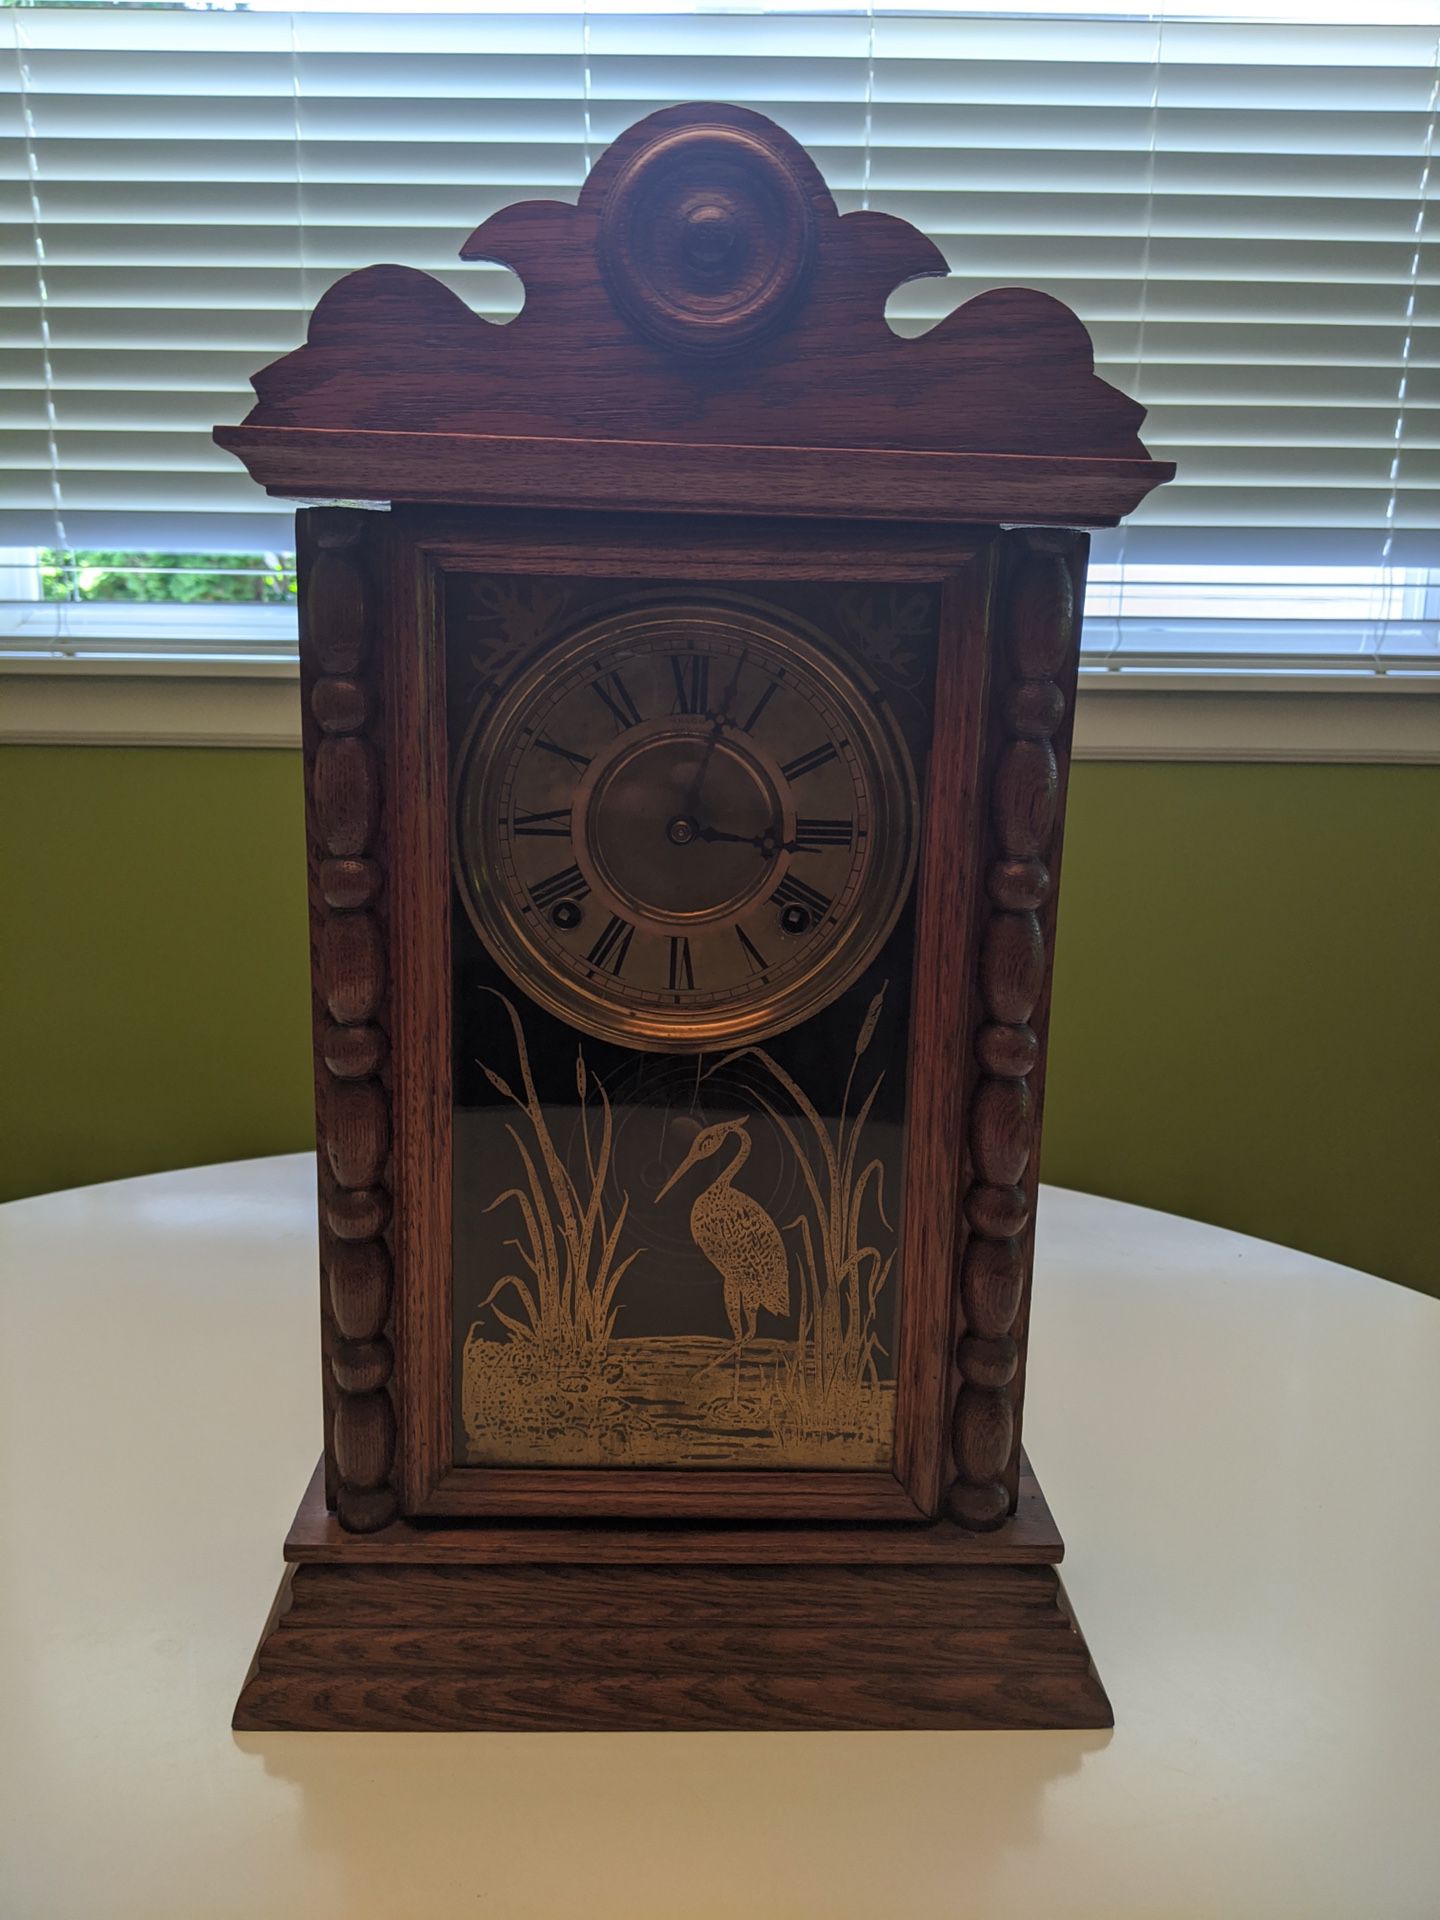 Antique Clock from E. N Welch Mfg.